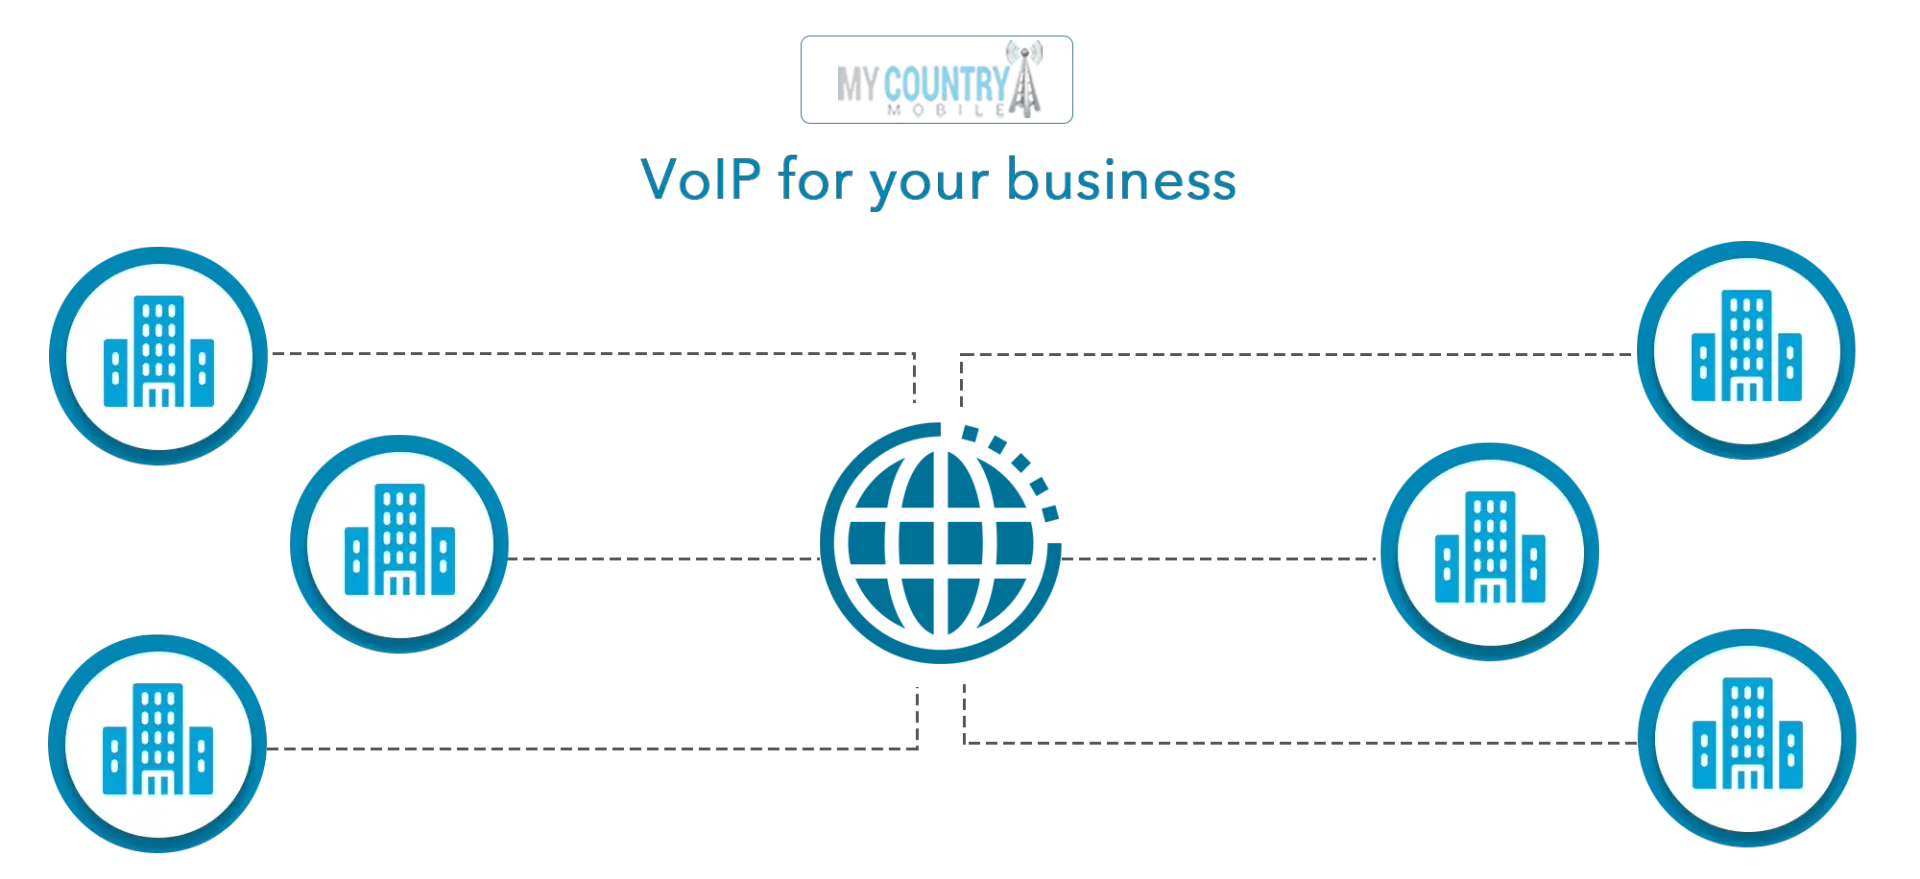 Business Number On Personal Phone VoIP